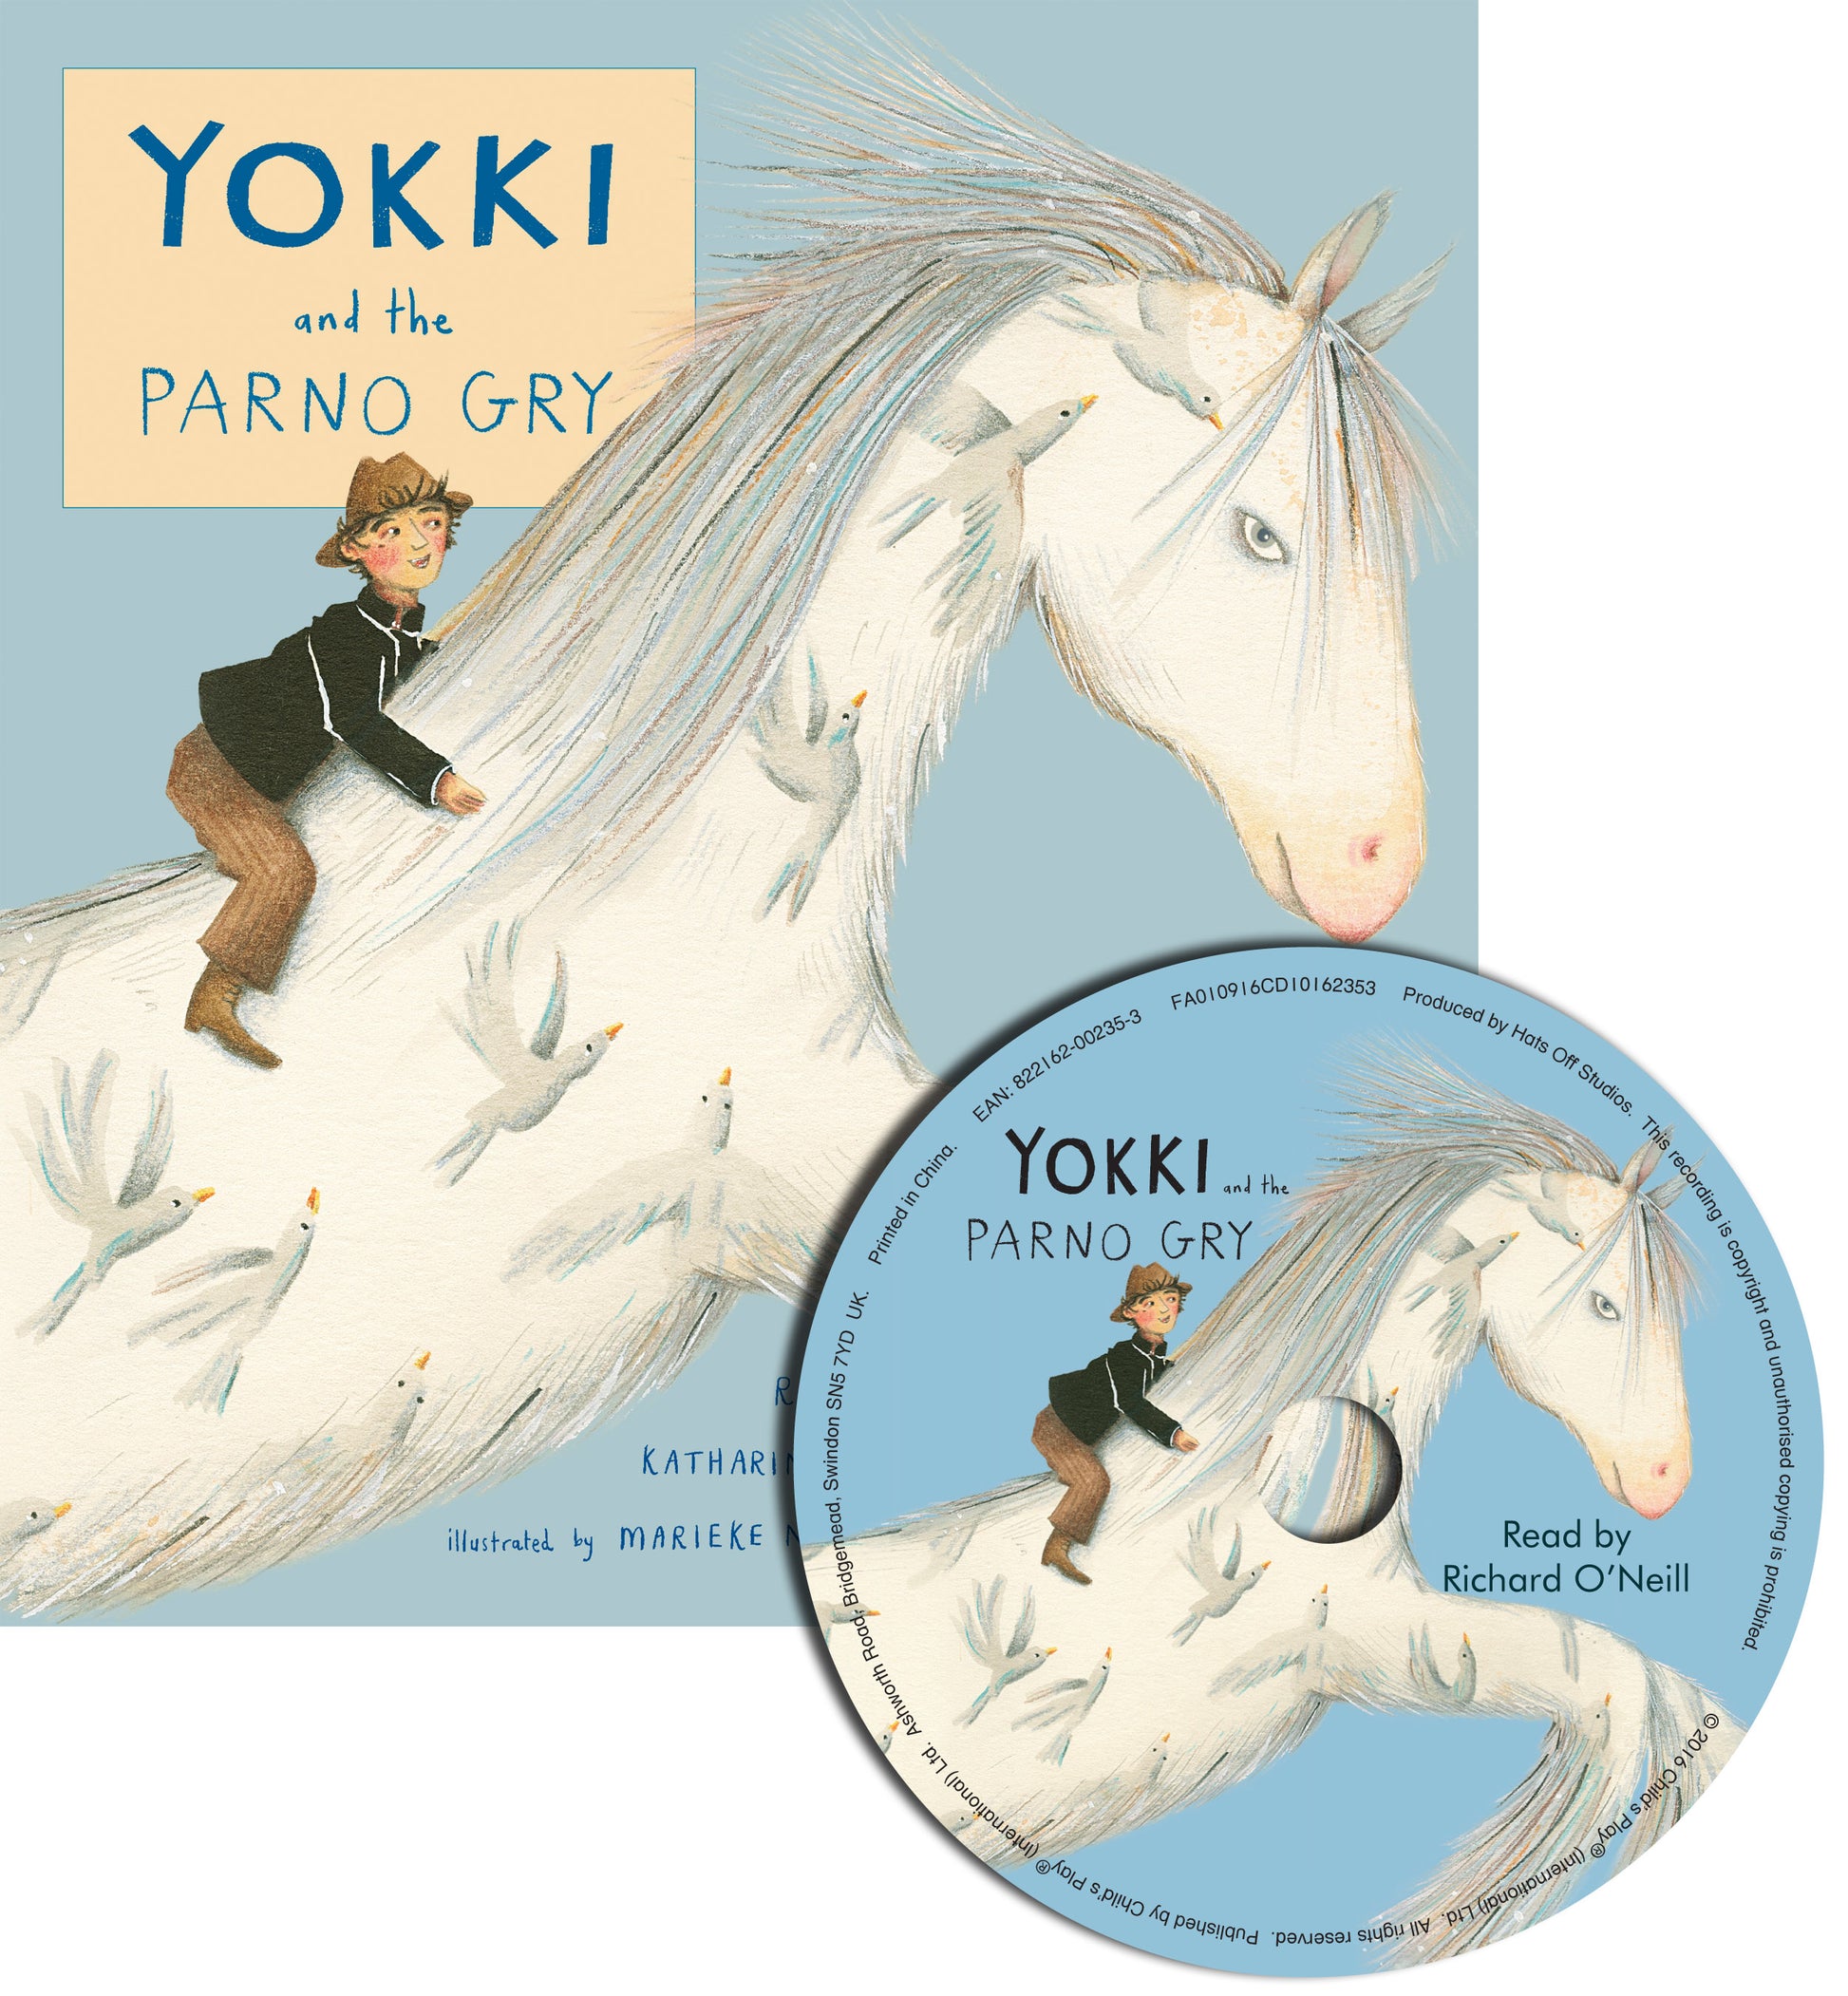 Yokki and the Parno Gry (Softcover and CD Edition)